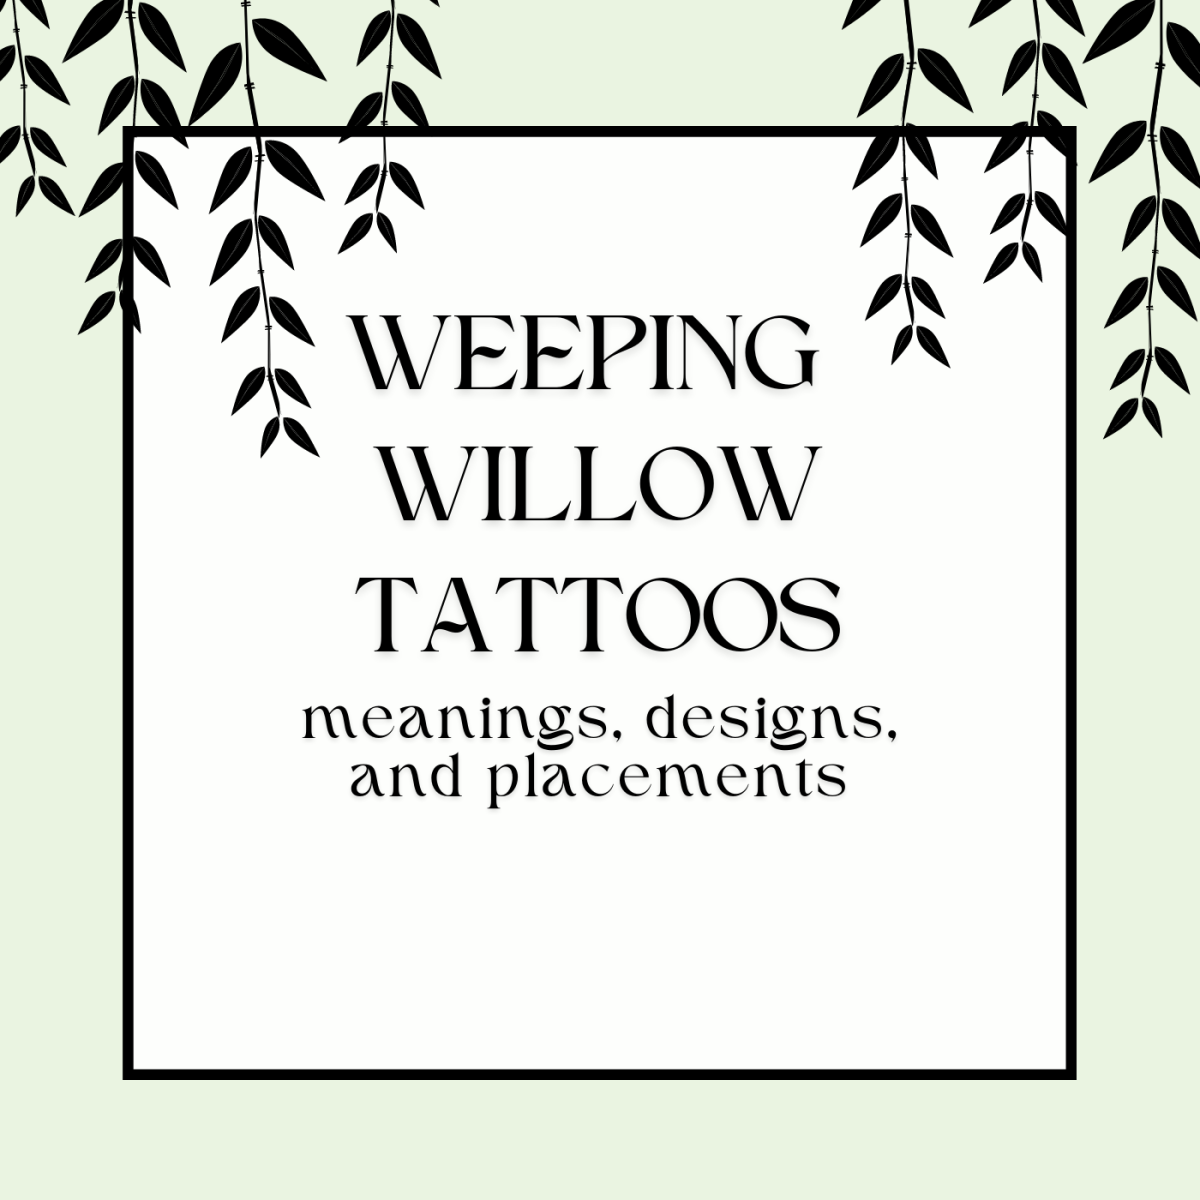 Weeping Willow Tattoo (Meaning, Design, and Placement Ideas)